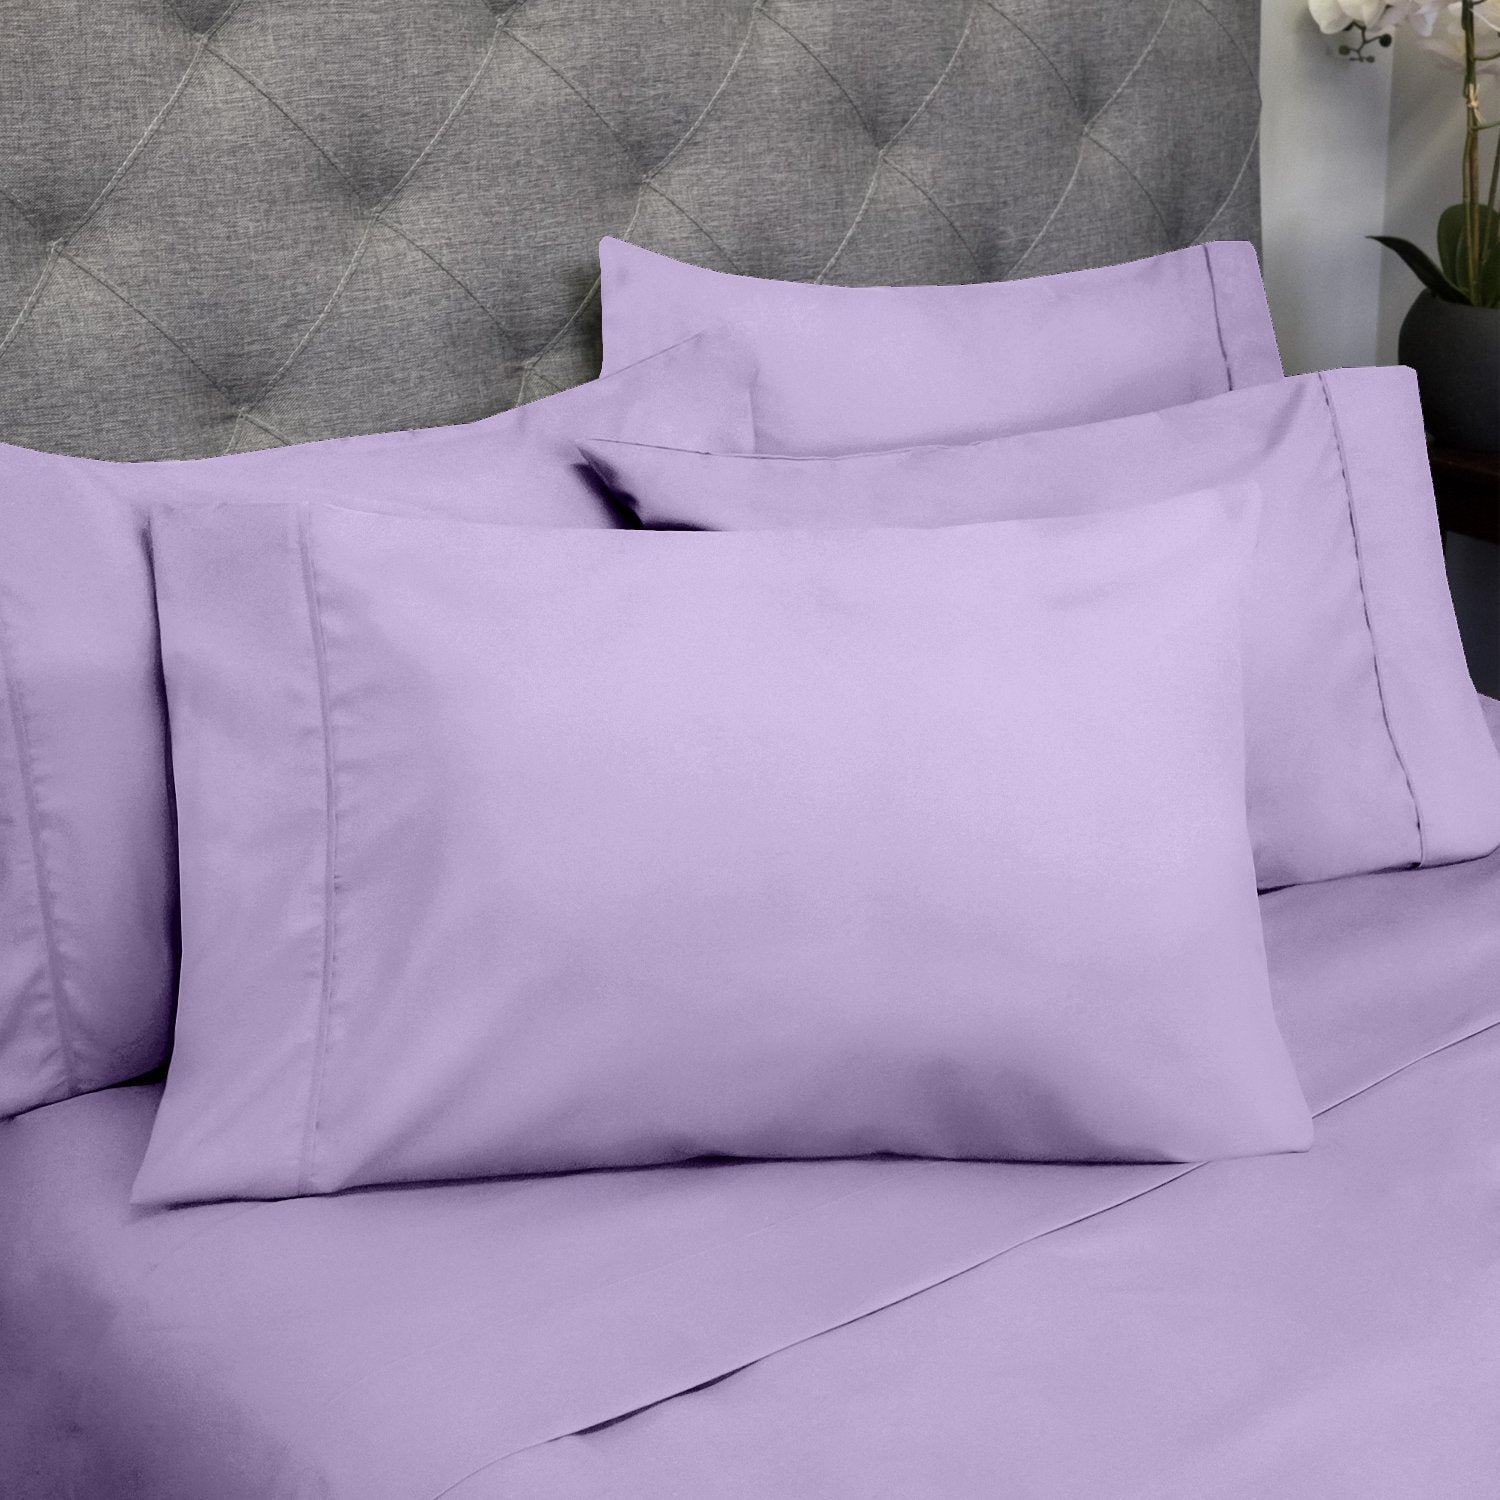 Deluxe 6-Piece Bed Sheet Set (Lavender) - Pillowcases